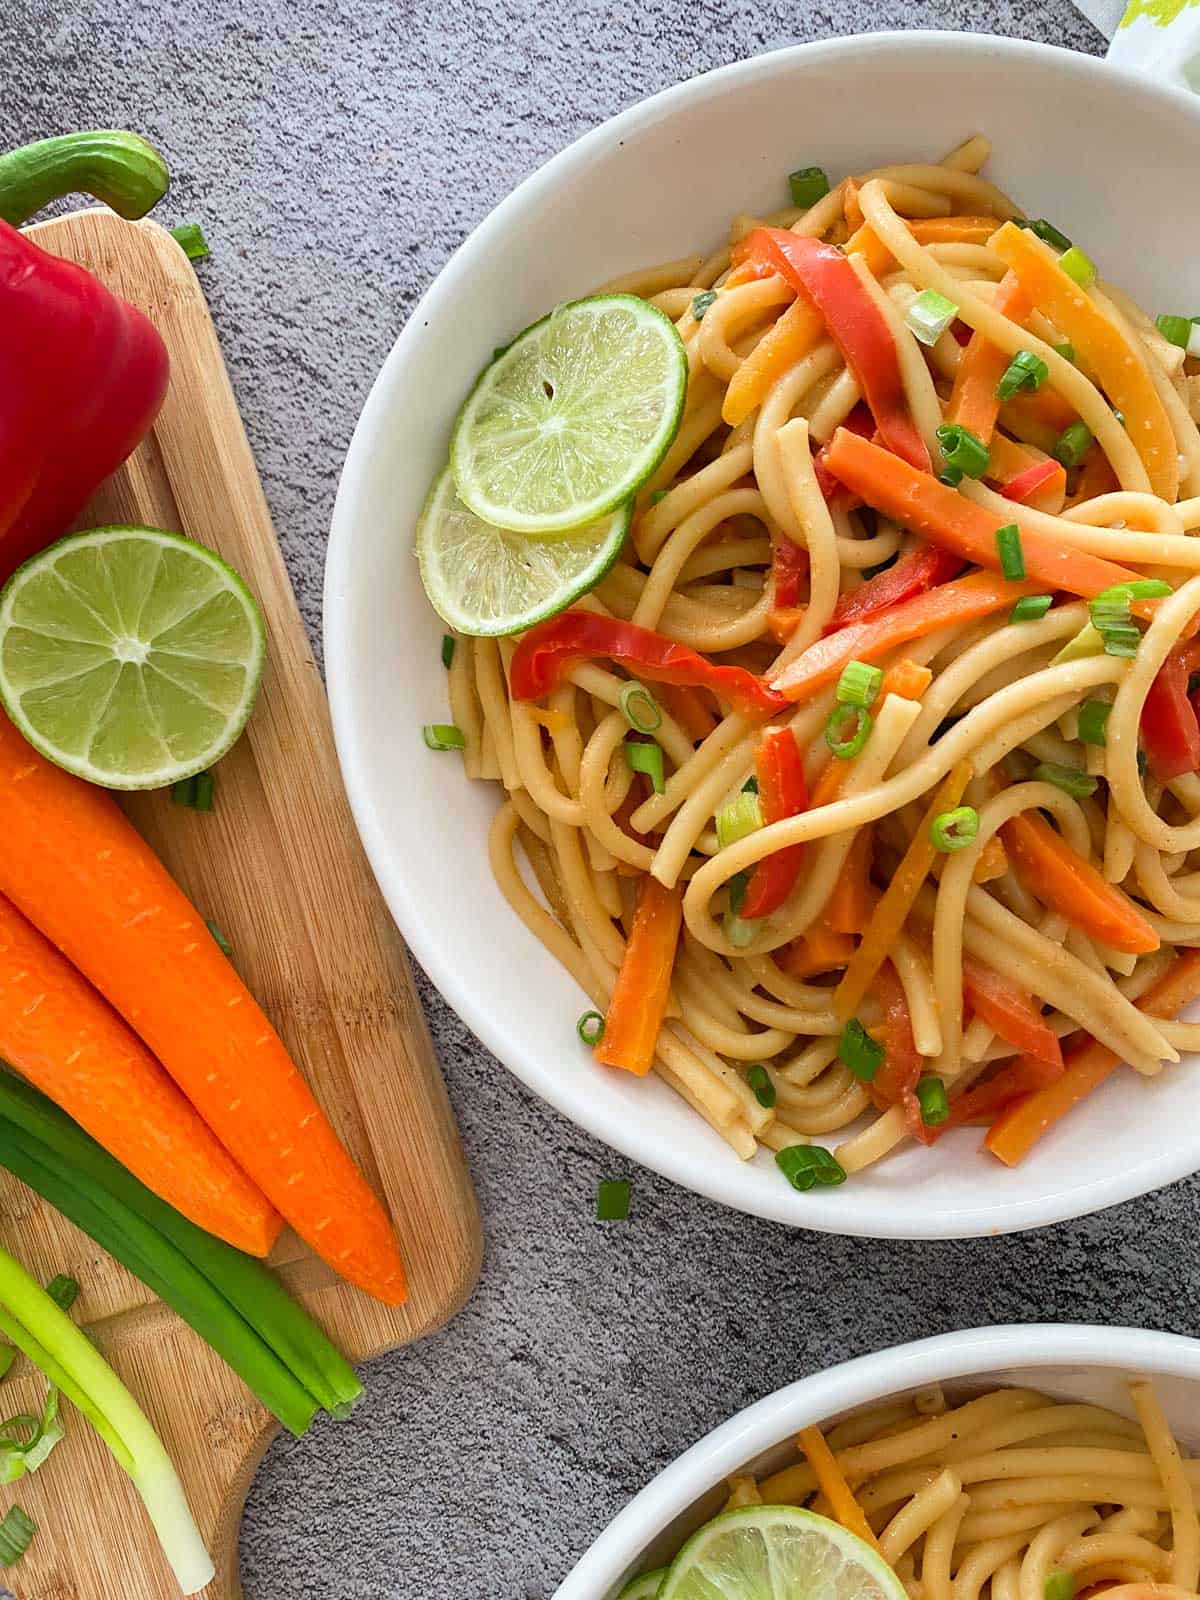 Two plates with peanut noodles with carrots, peppers and lime garnish.